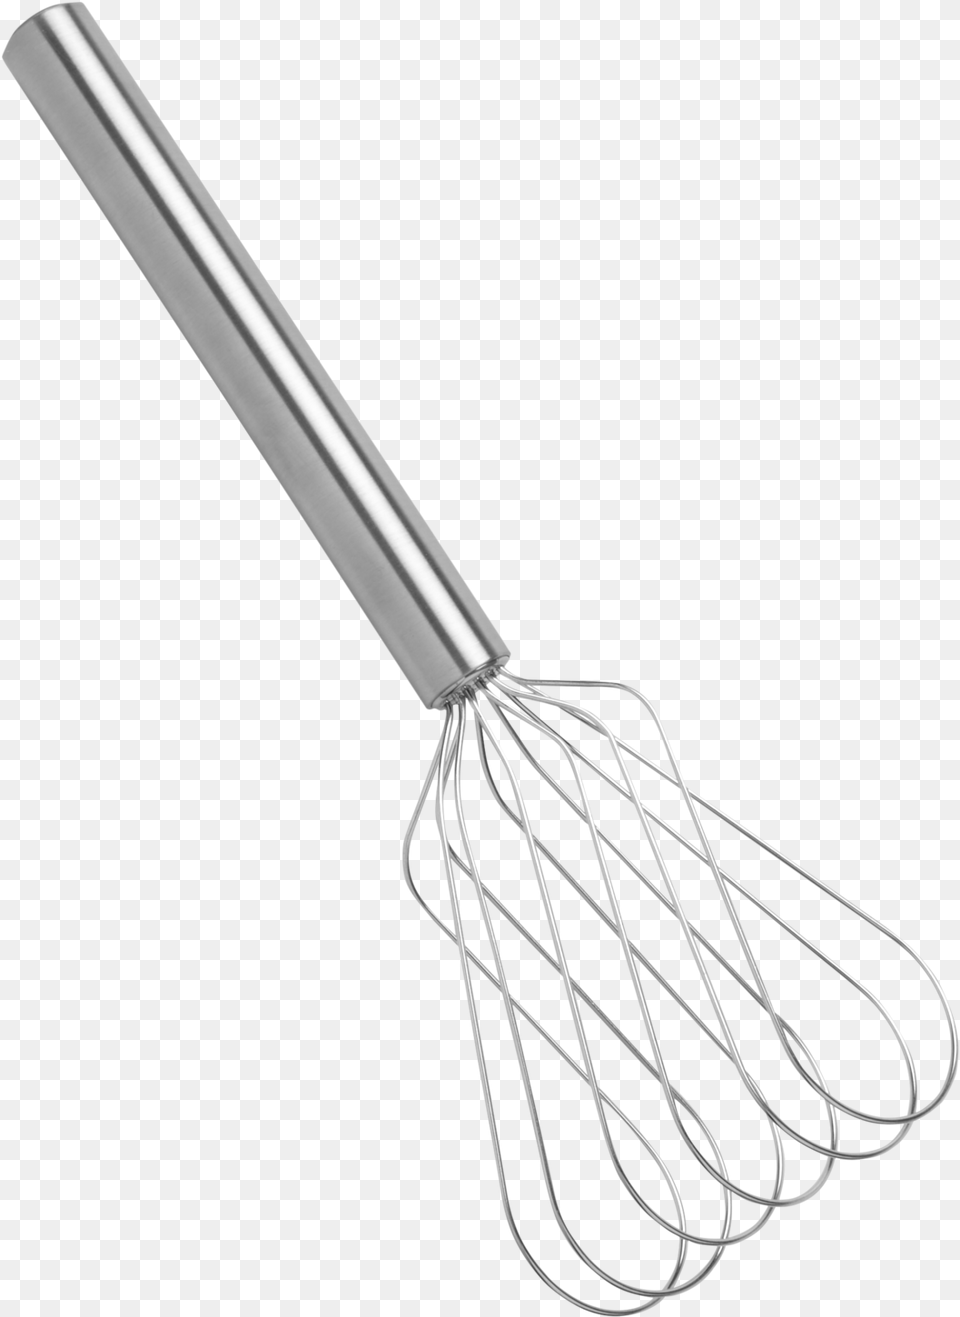 Christopher Kimball For Kuhn Rikon Traverse Power Whisk Whisk, Appliance, Device, Electrical Device, Mixer Png